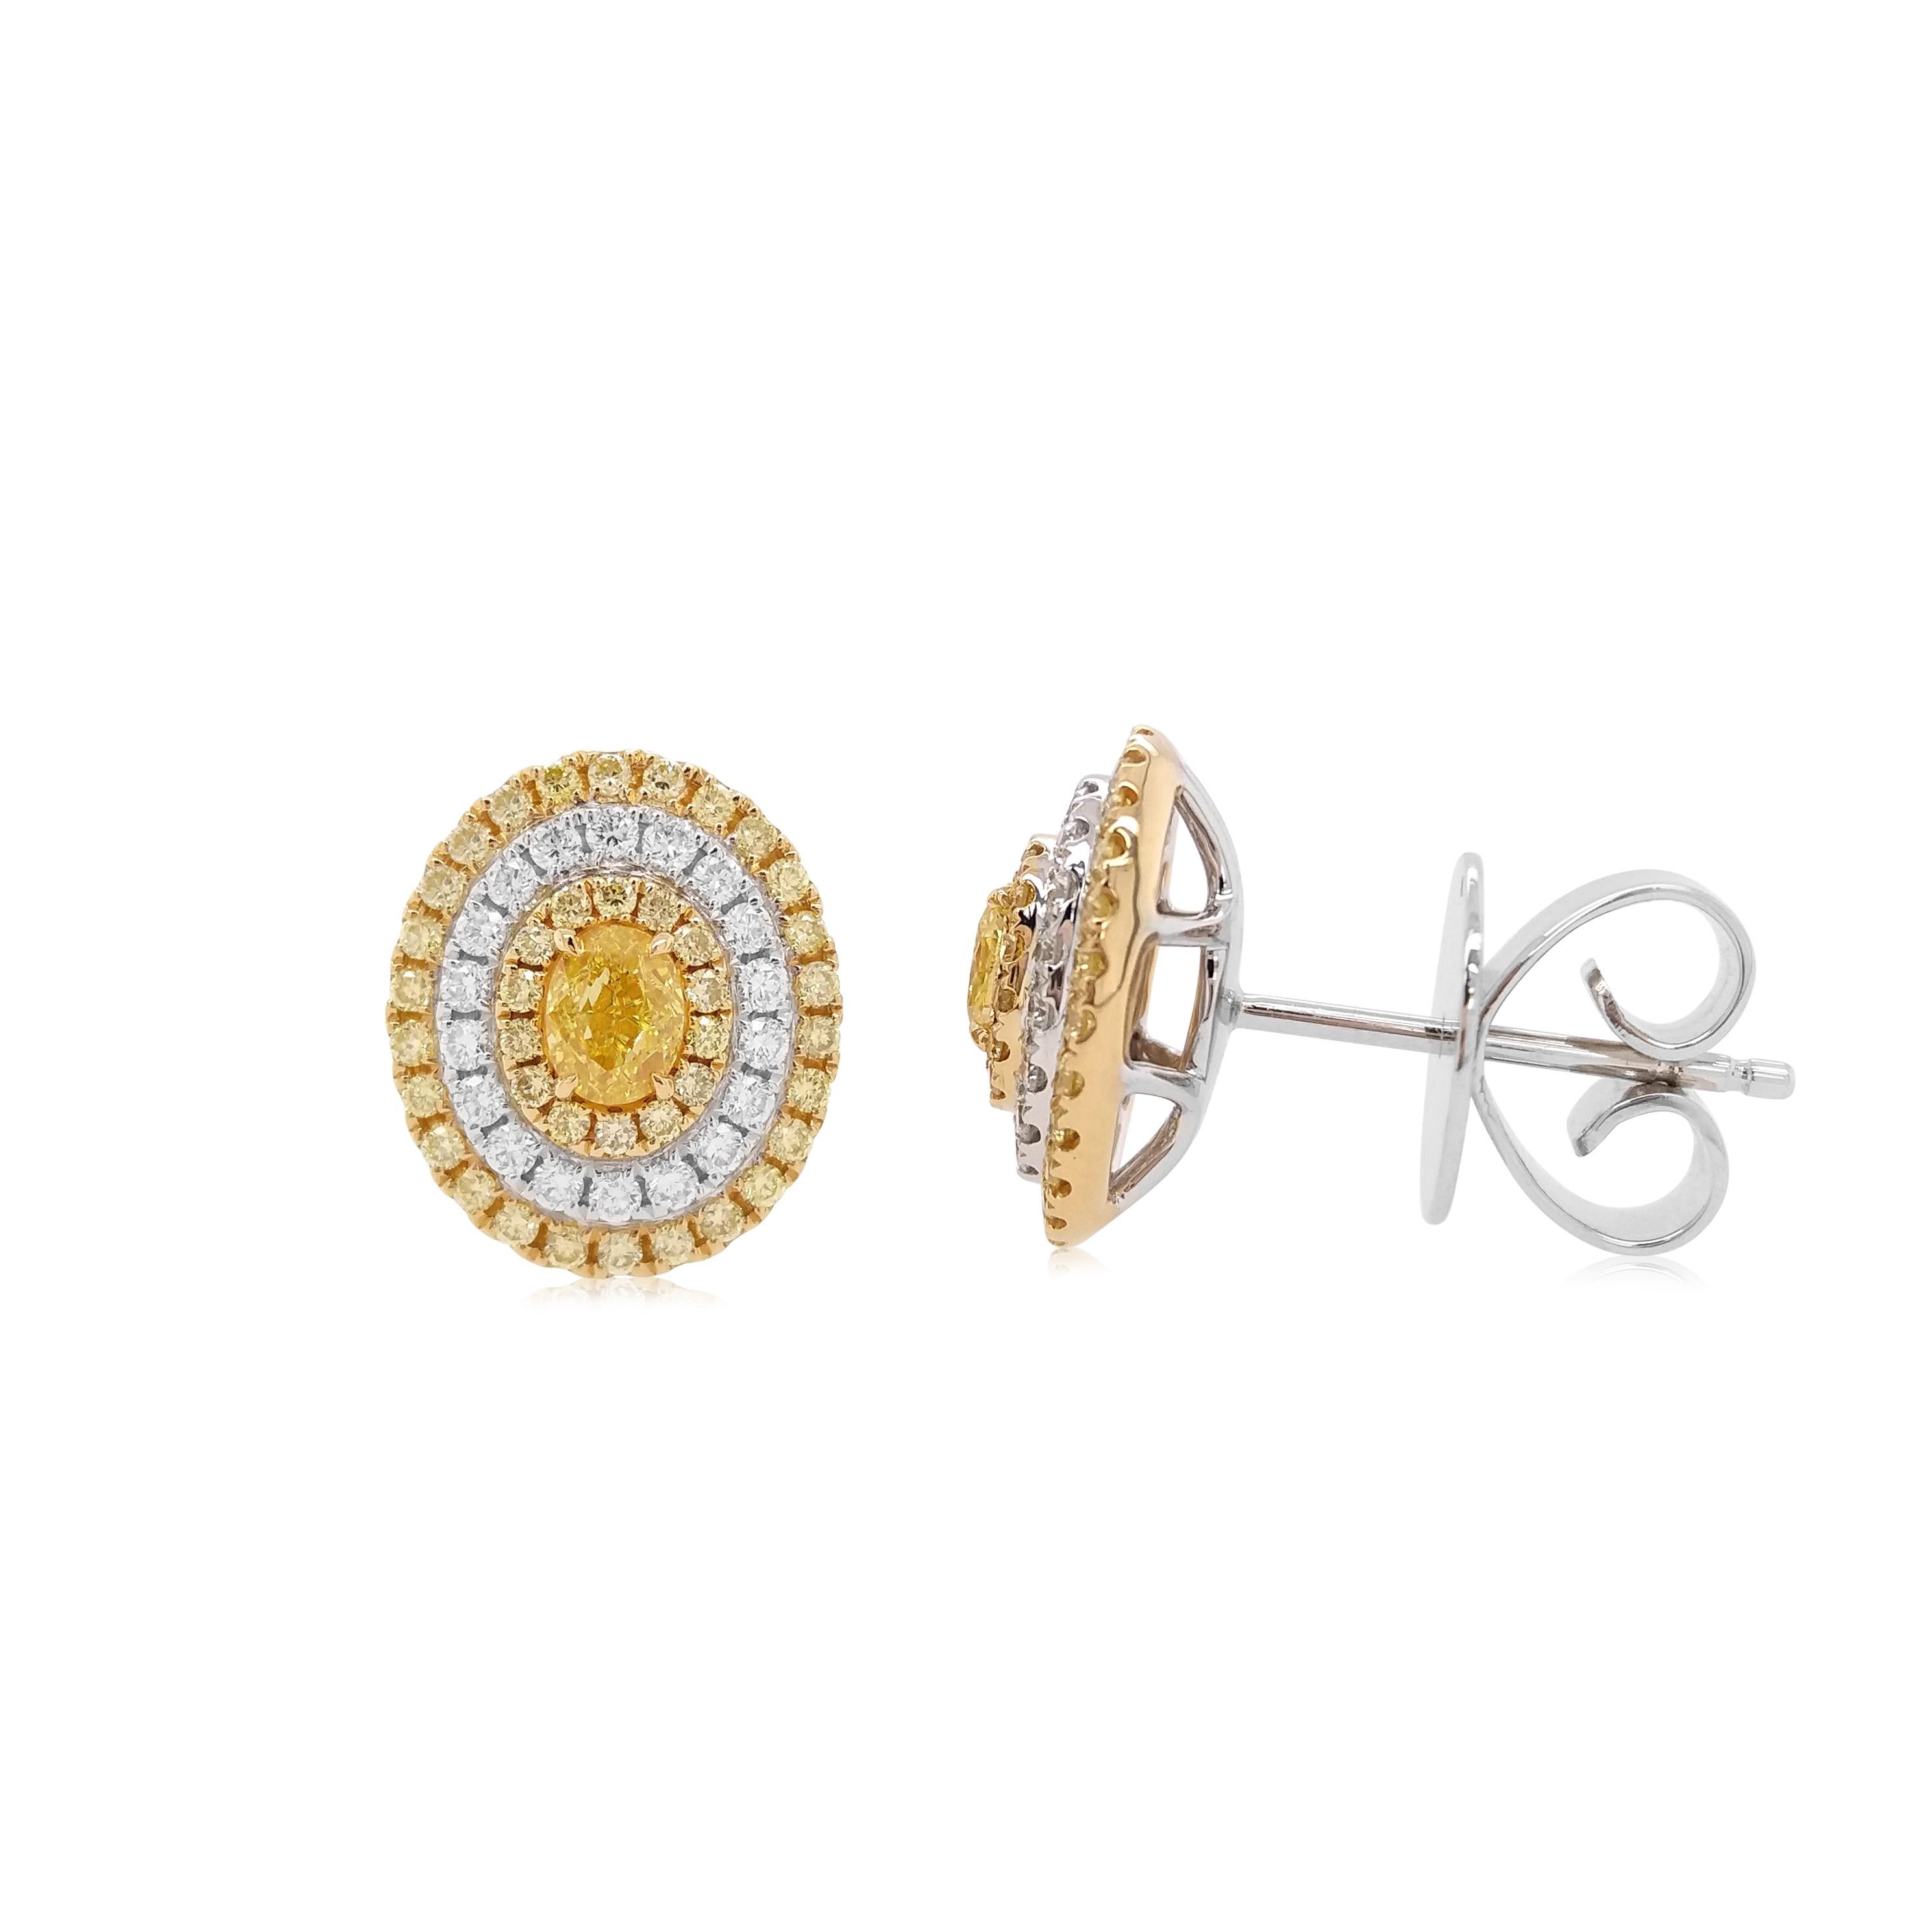 These intricate earrings feature lustrous oval-shaped Yellow diamonds with halos of sparkling yellow and white diamonds. Bold and striking, these earrings will add a touch of sophistication whenever they are worn. The perfect gift for a loved one,